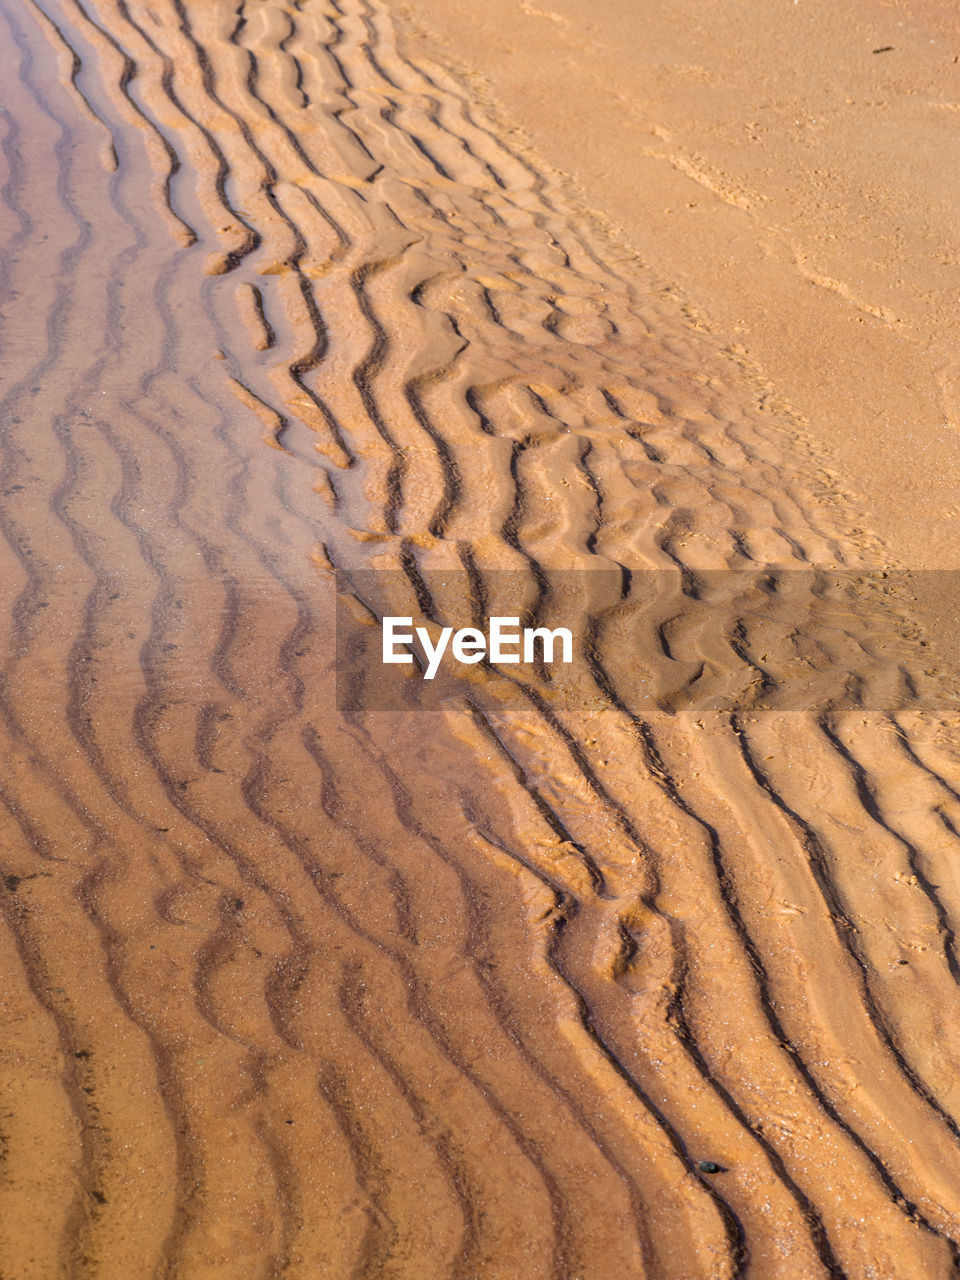 Background from fine and wet sand, sand textures, sand beach background.